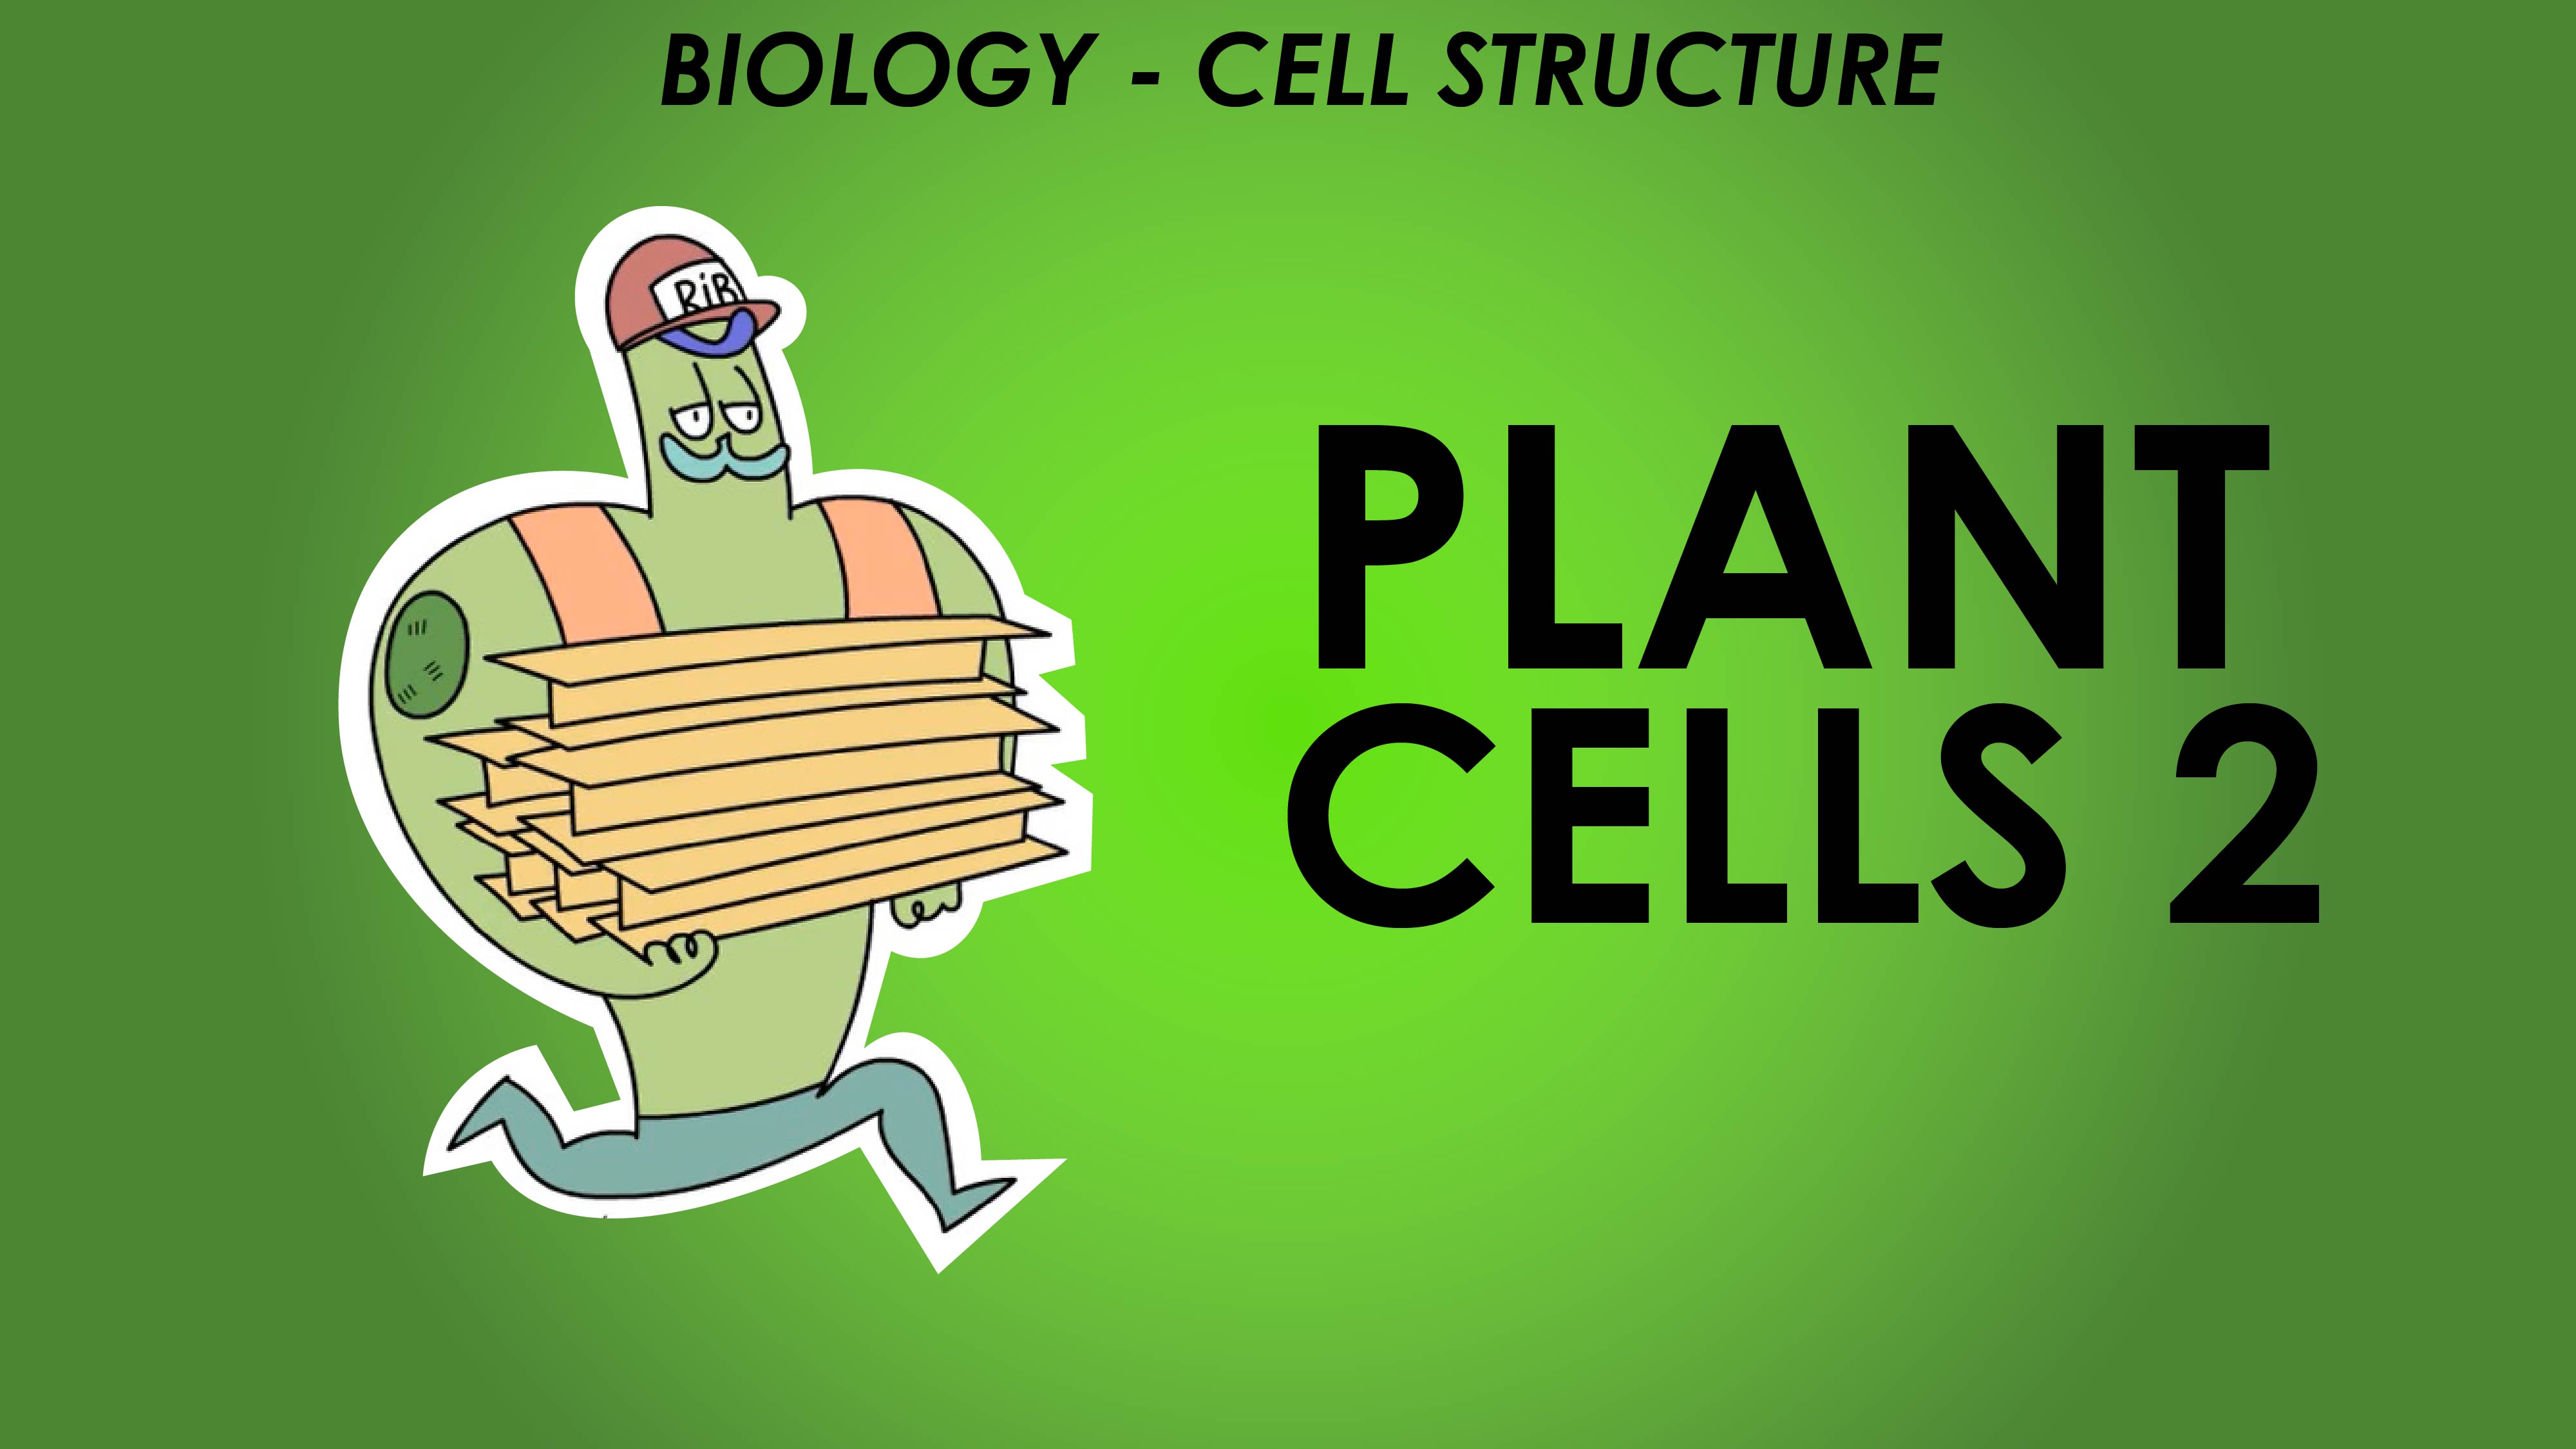 Plant Cells 2 - Cell Structure